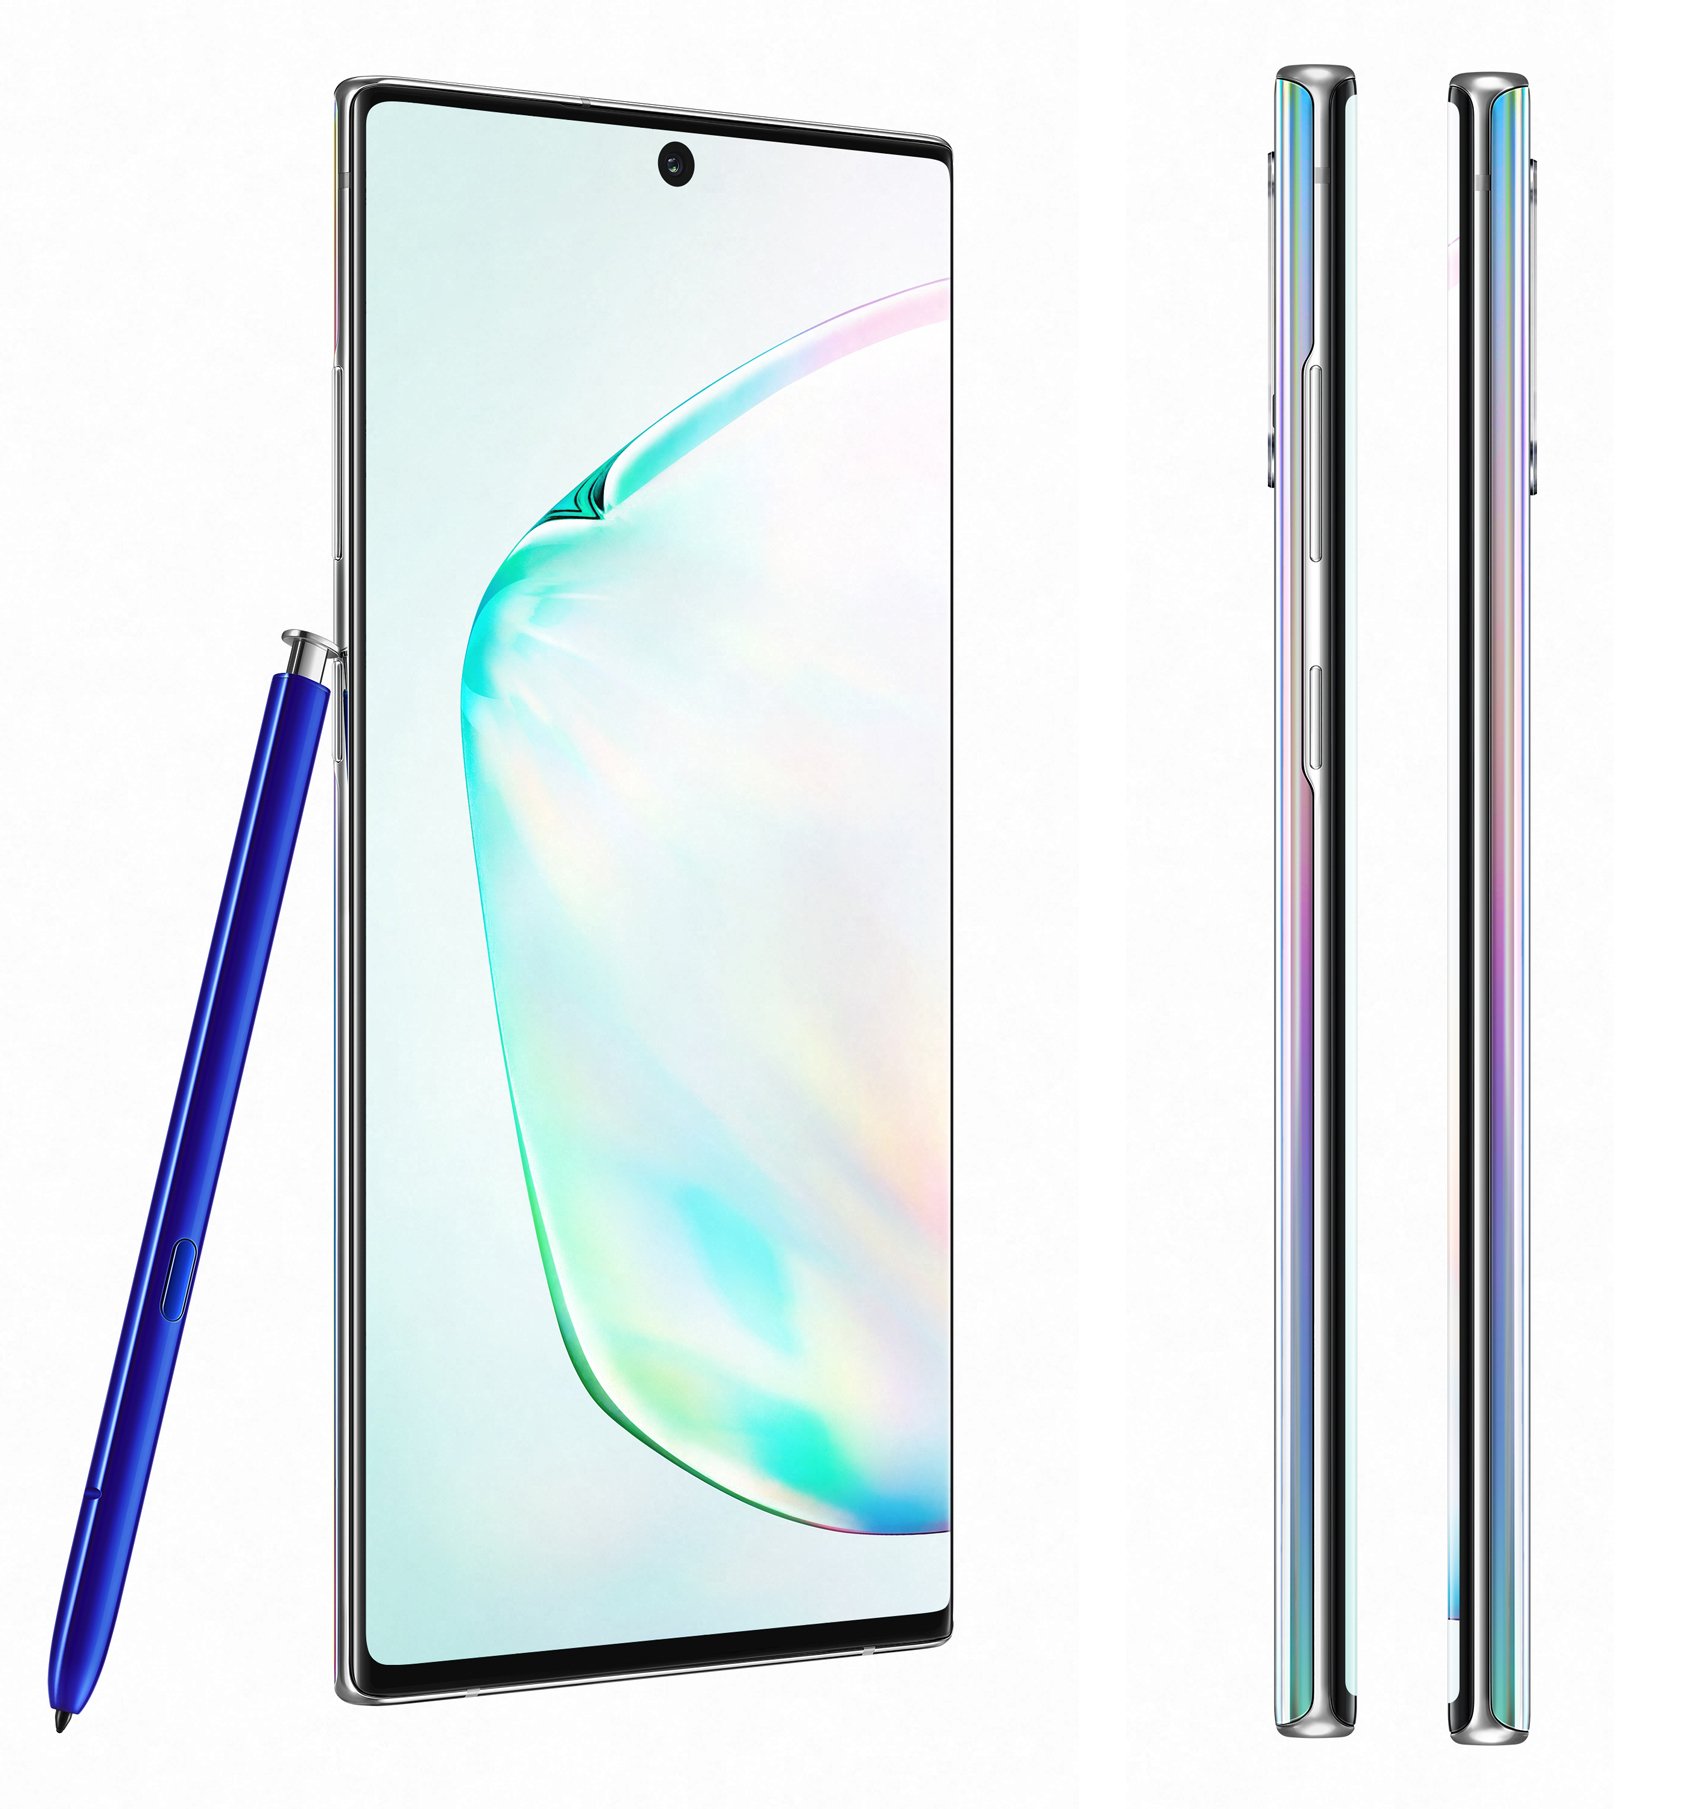 Samsung Galaxy Note 10+ 5G specs, review, release date - PhonesData